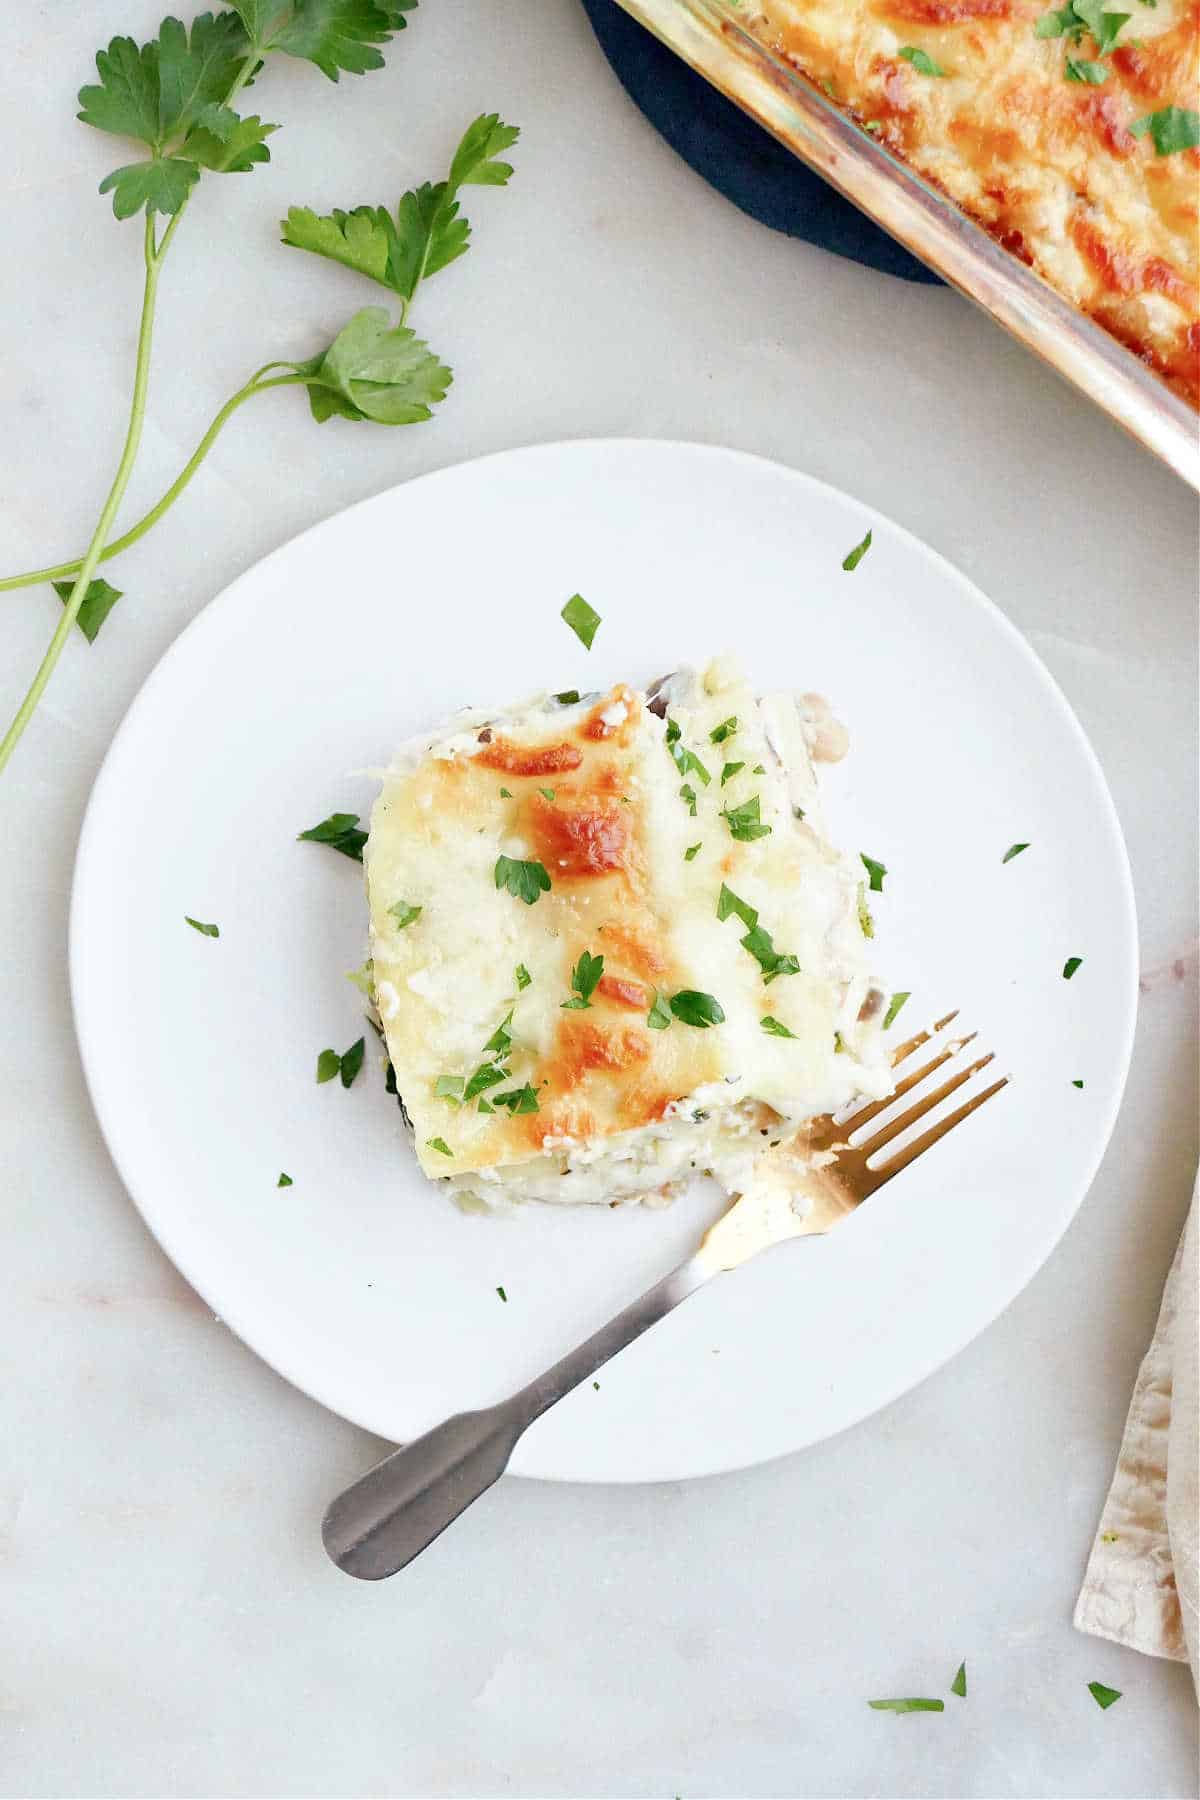 slice of vegetable lasagna on a plate with a fork